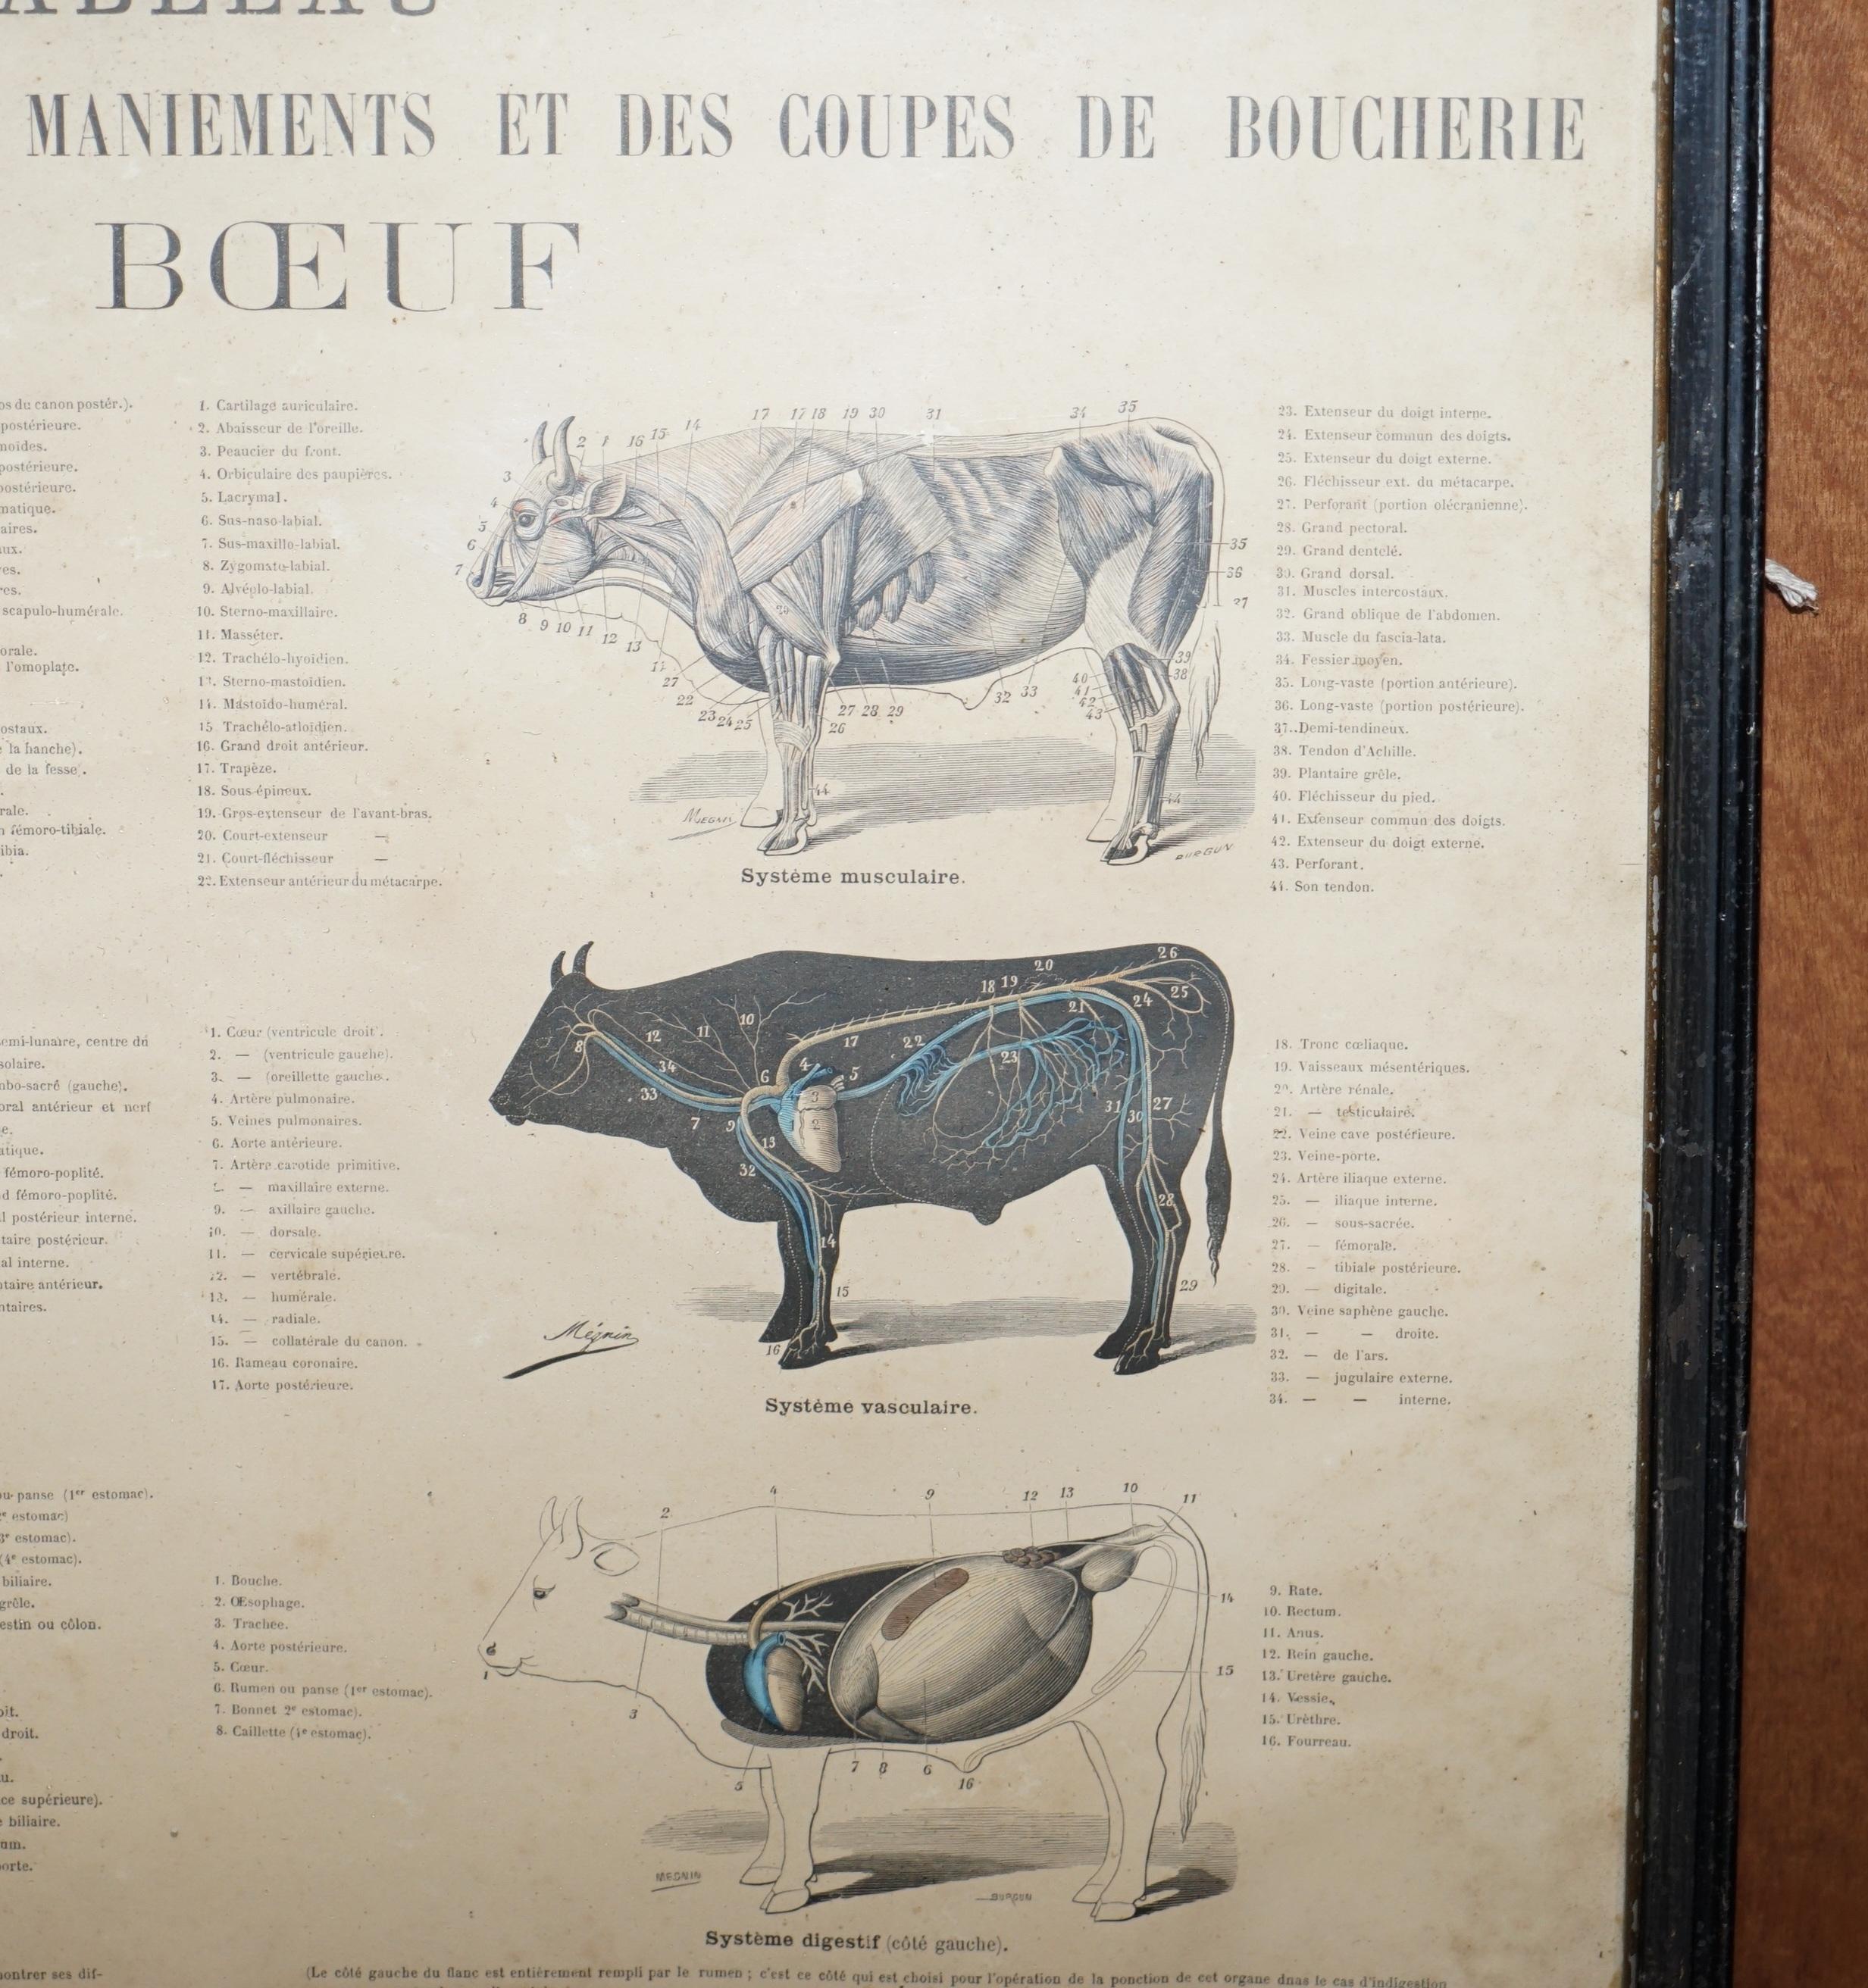 Hand-Crafted Antique French Print of Basic Anatomy of Handling and Butcher Cuts of Beef